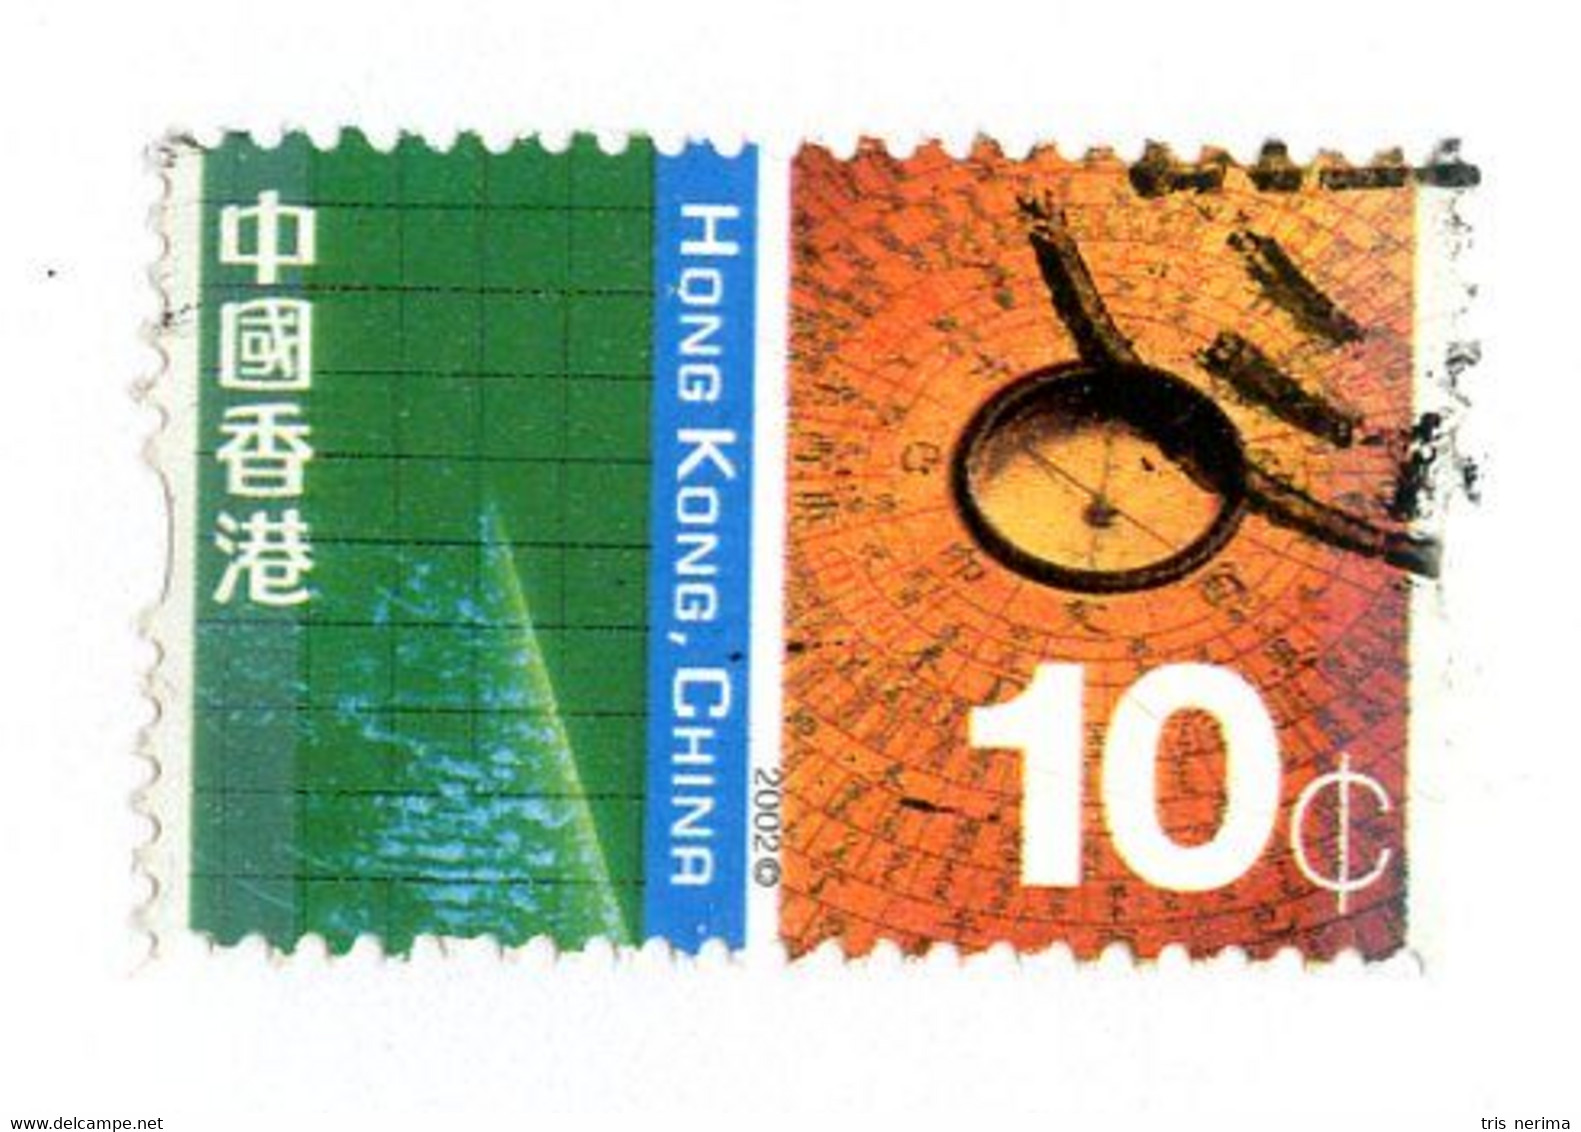 BC 9248 Hong Kong Scott # 998 Used  [Offers Welcome] - Used Stamps